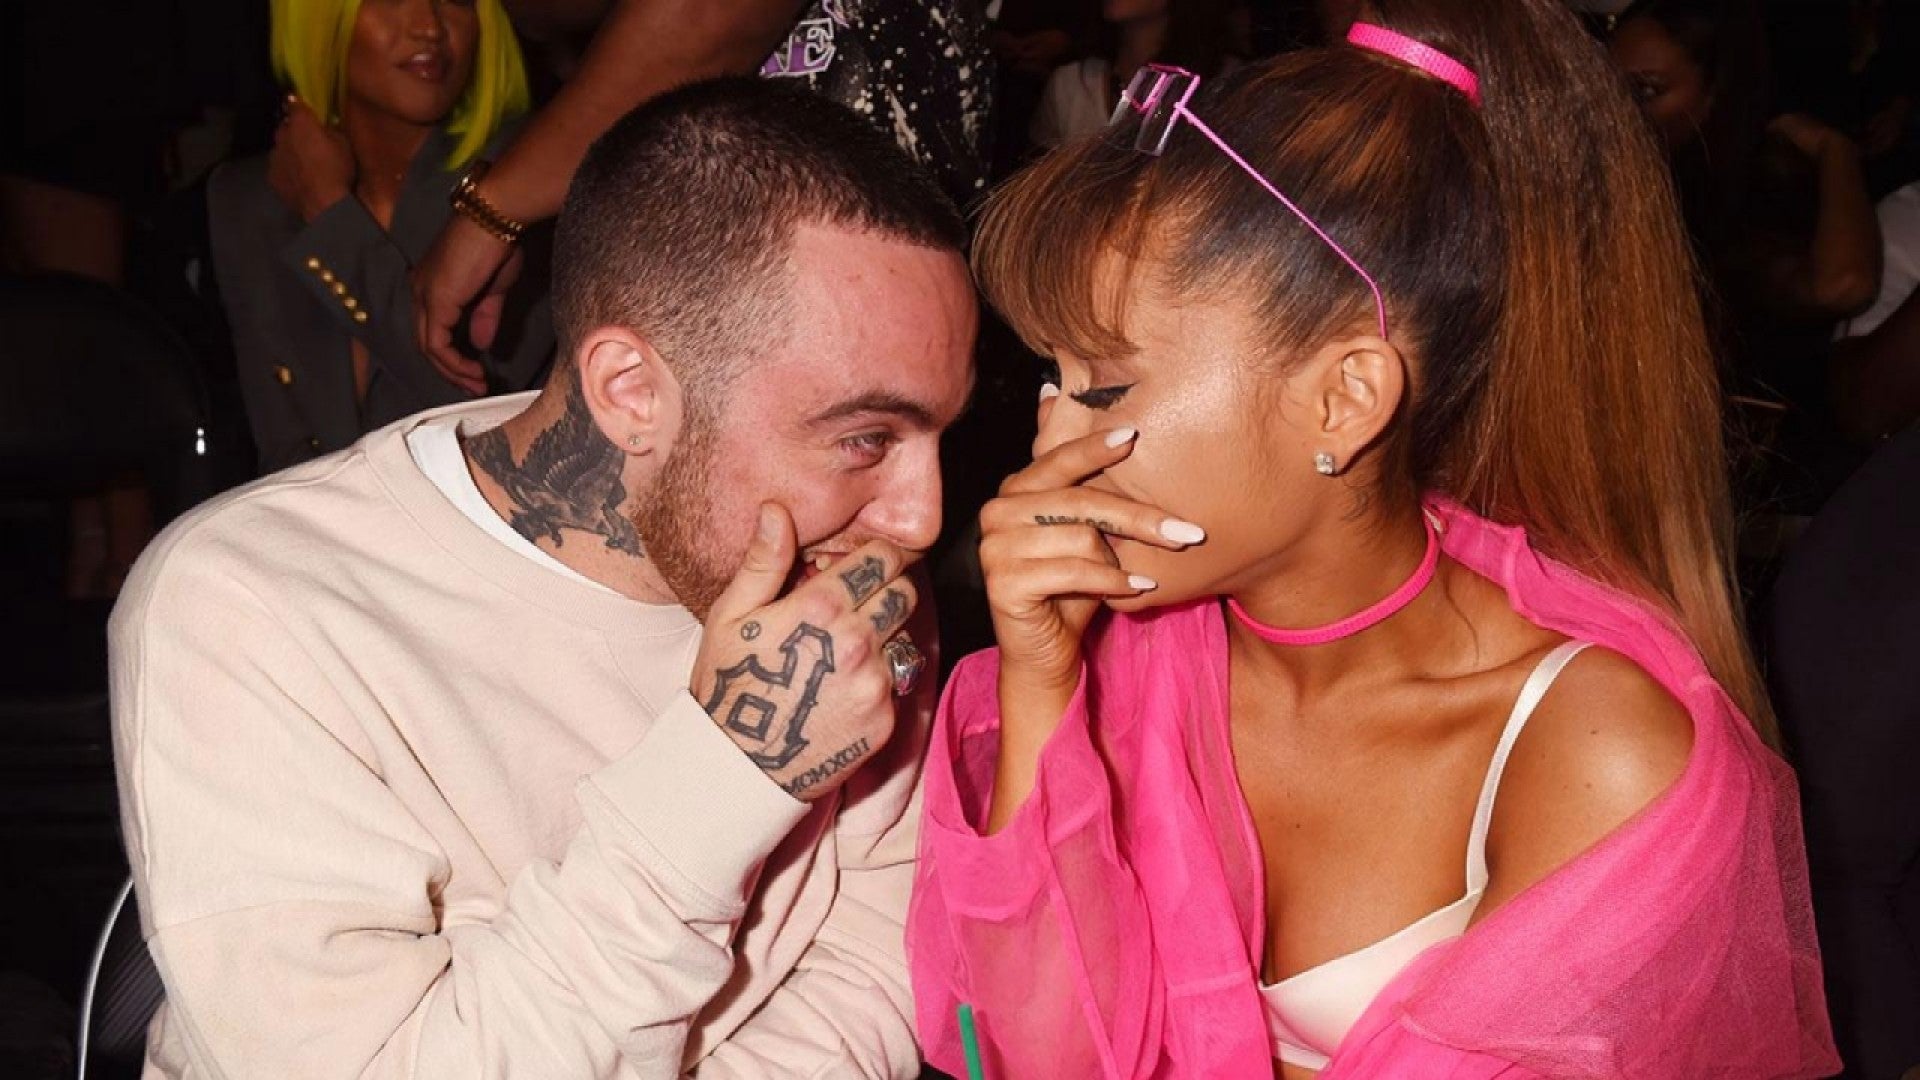 Mac Miller's Will: Who Will Inherit His Estate After Sudden Death